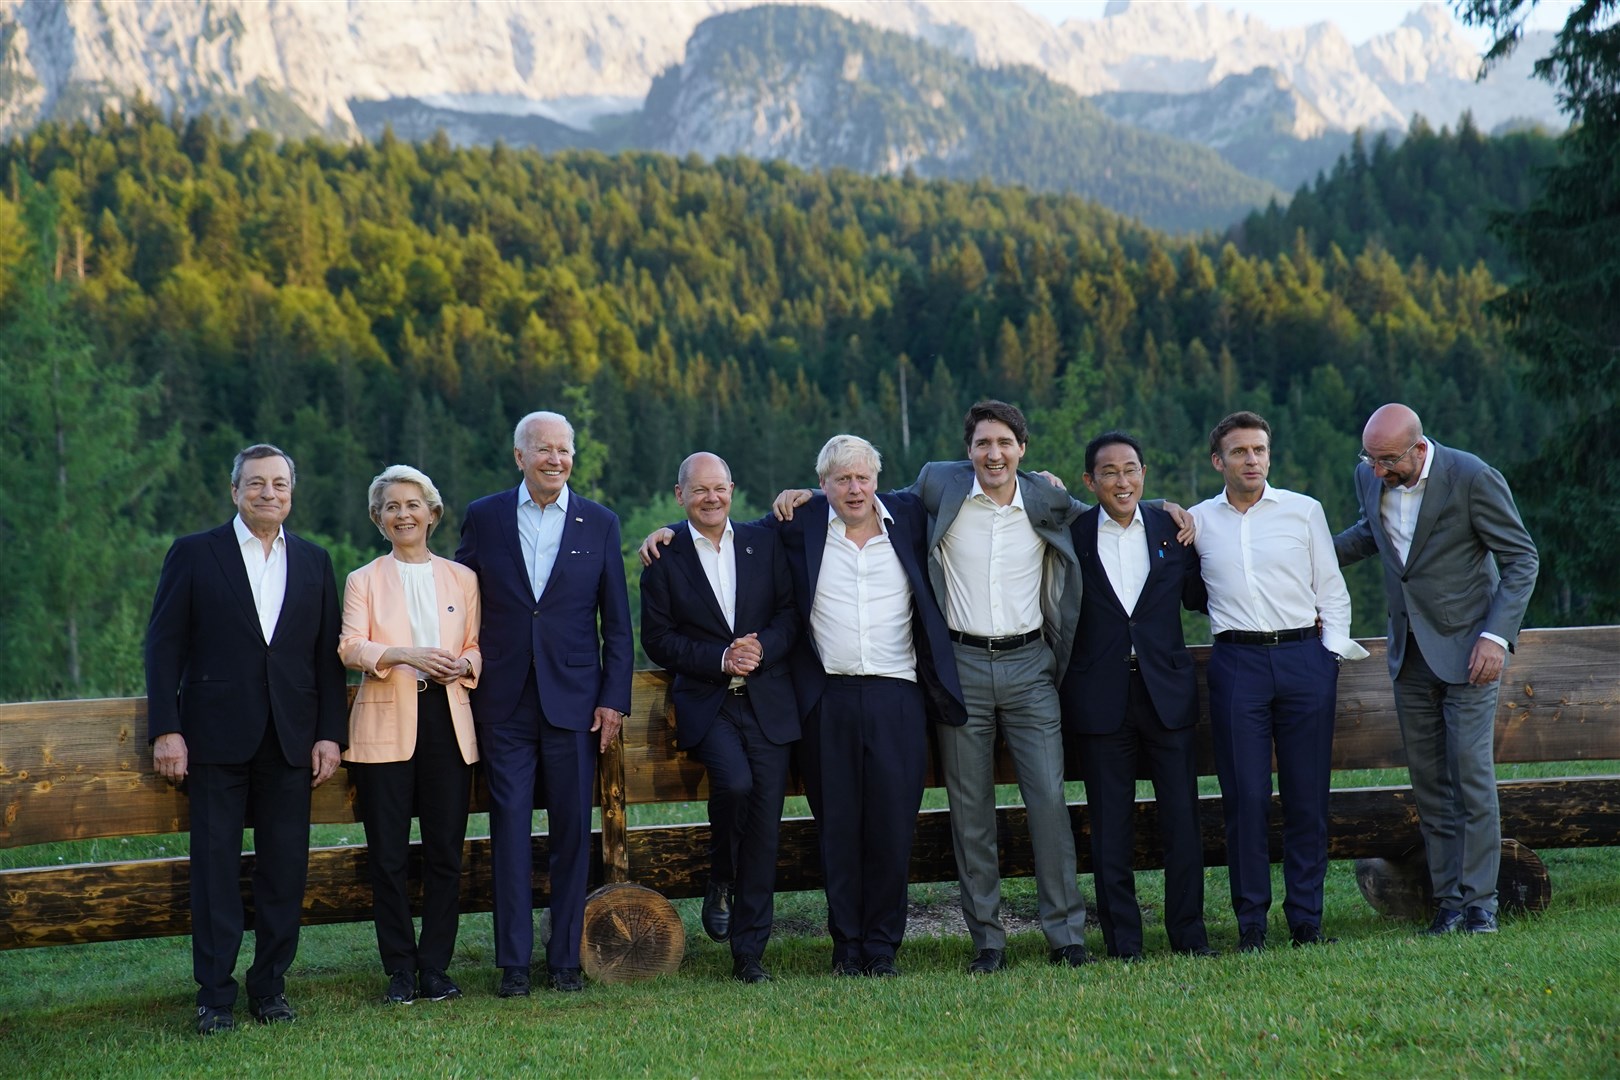 G7 leaders pose for an informal family photo following their working session dinner during the G7 summit in Schloss Elmau, in the Bavarian Alps, Germany (Stefan Rousseau/PA)